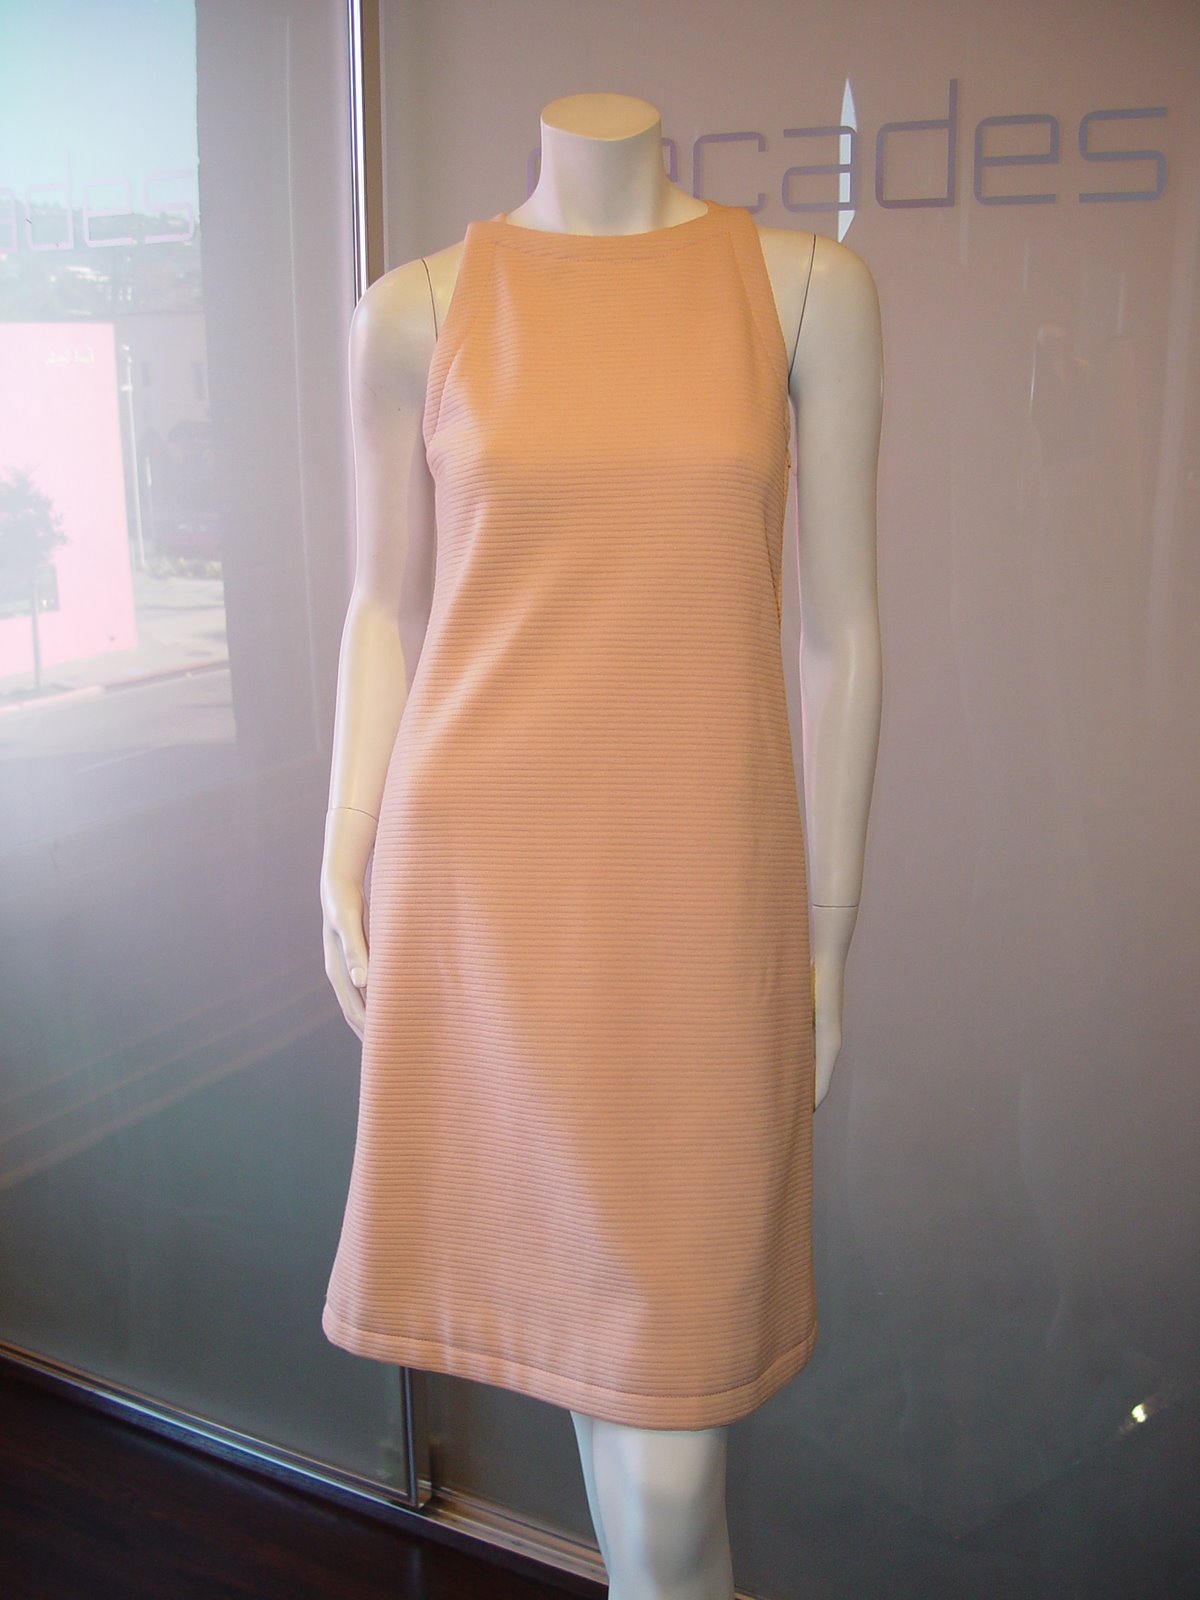 [TORRENE+PARIS+HAUTE+COUTURE+TRAPEZE+DRESS+IN+PINK+WOOL+JERSEY+WITH+RING+DETAIL+C+60S.JPG.JPG]